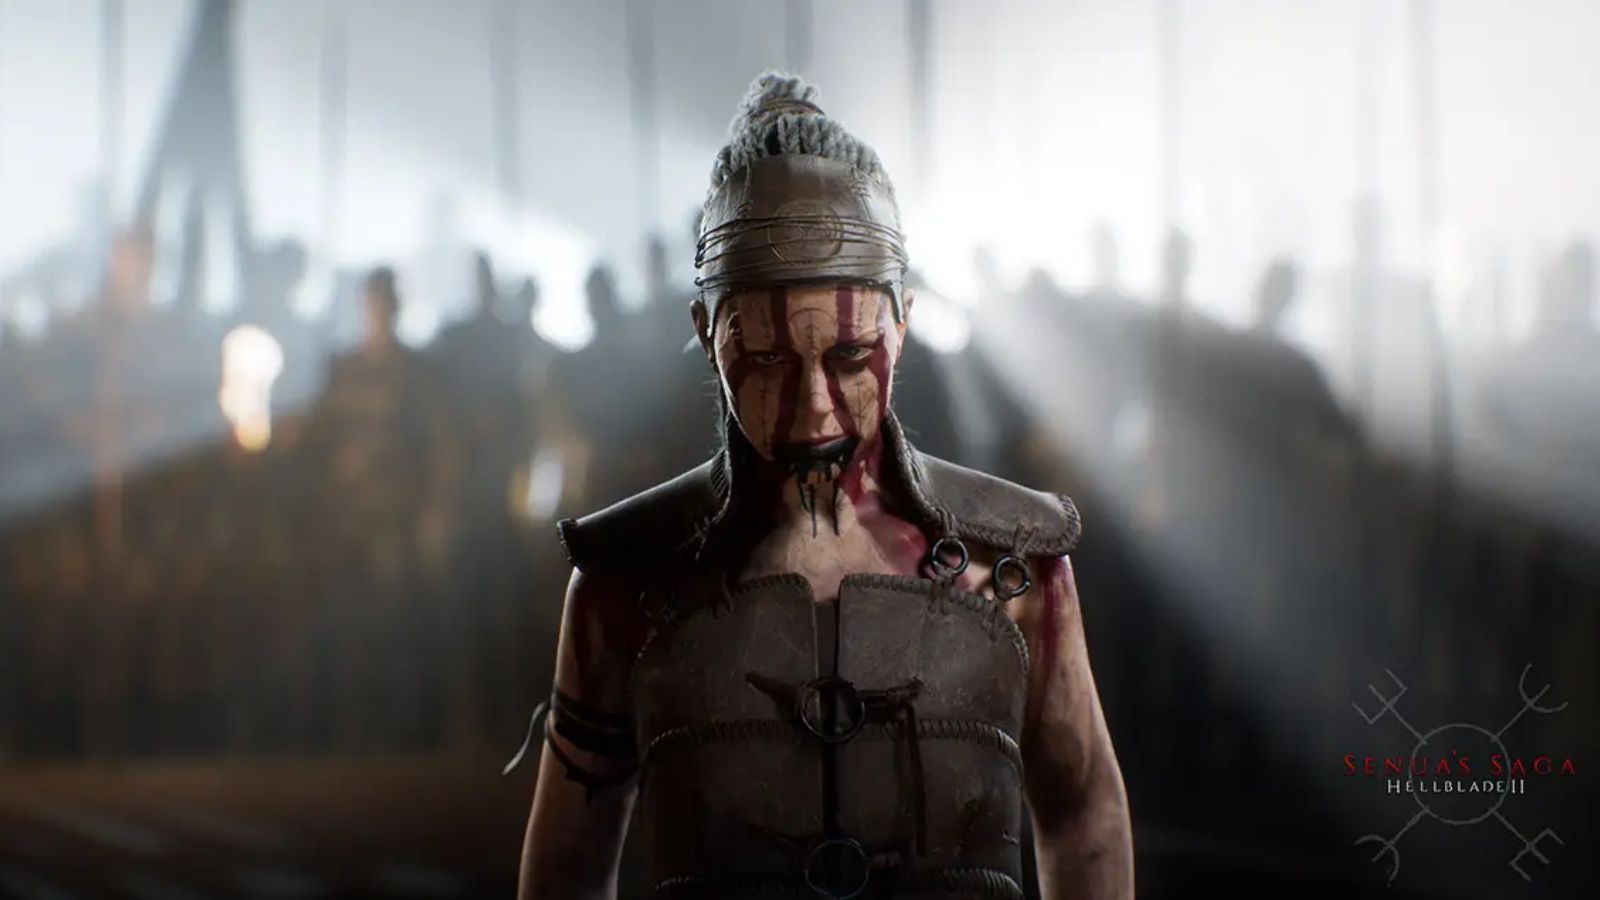 A preview of a bloodied Senua in Hellblade 2